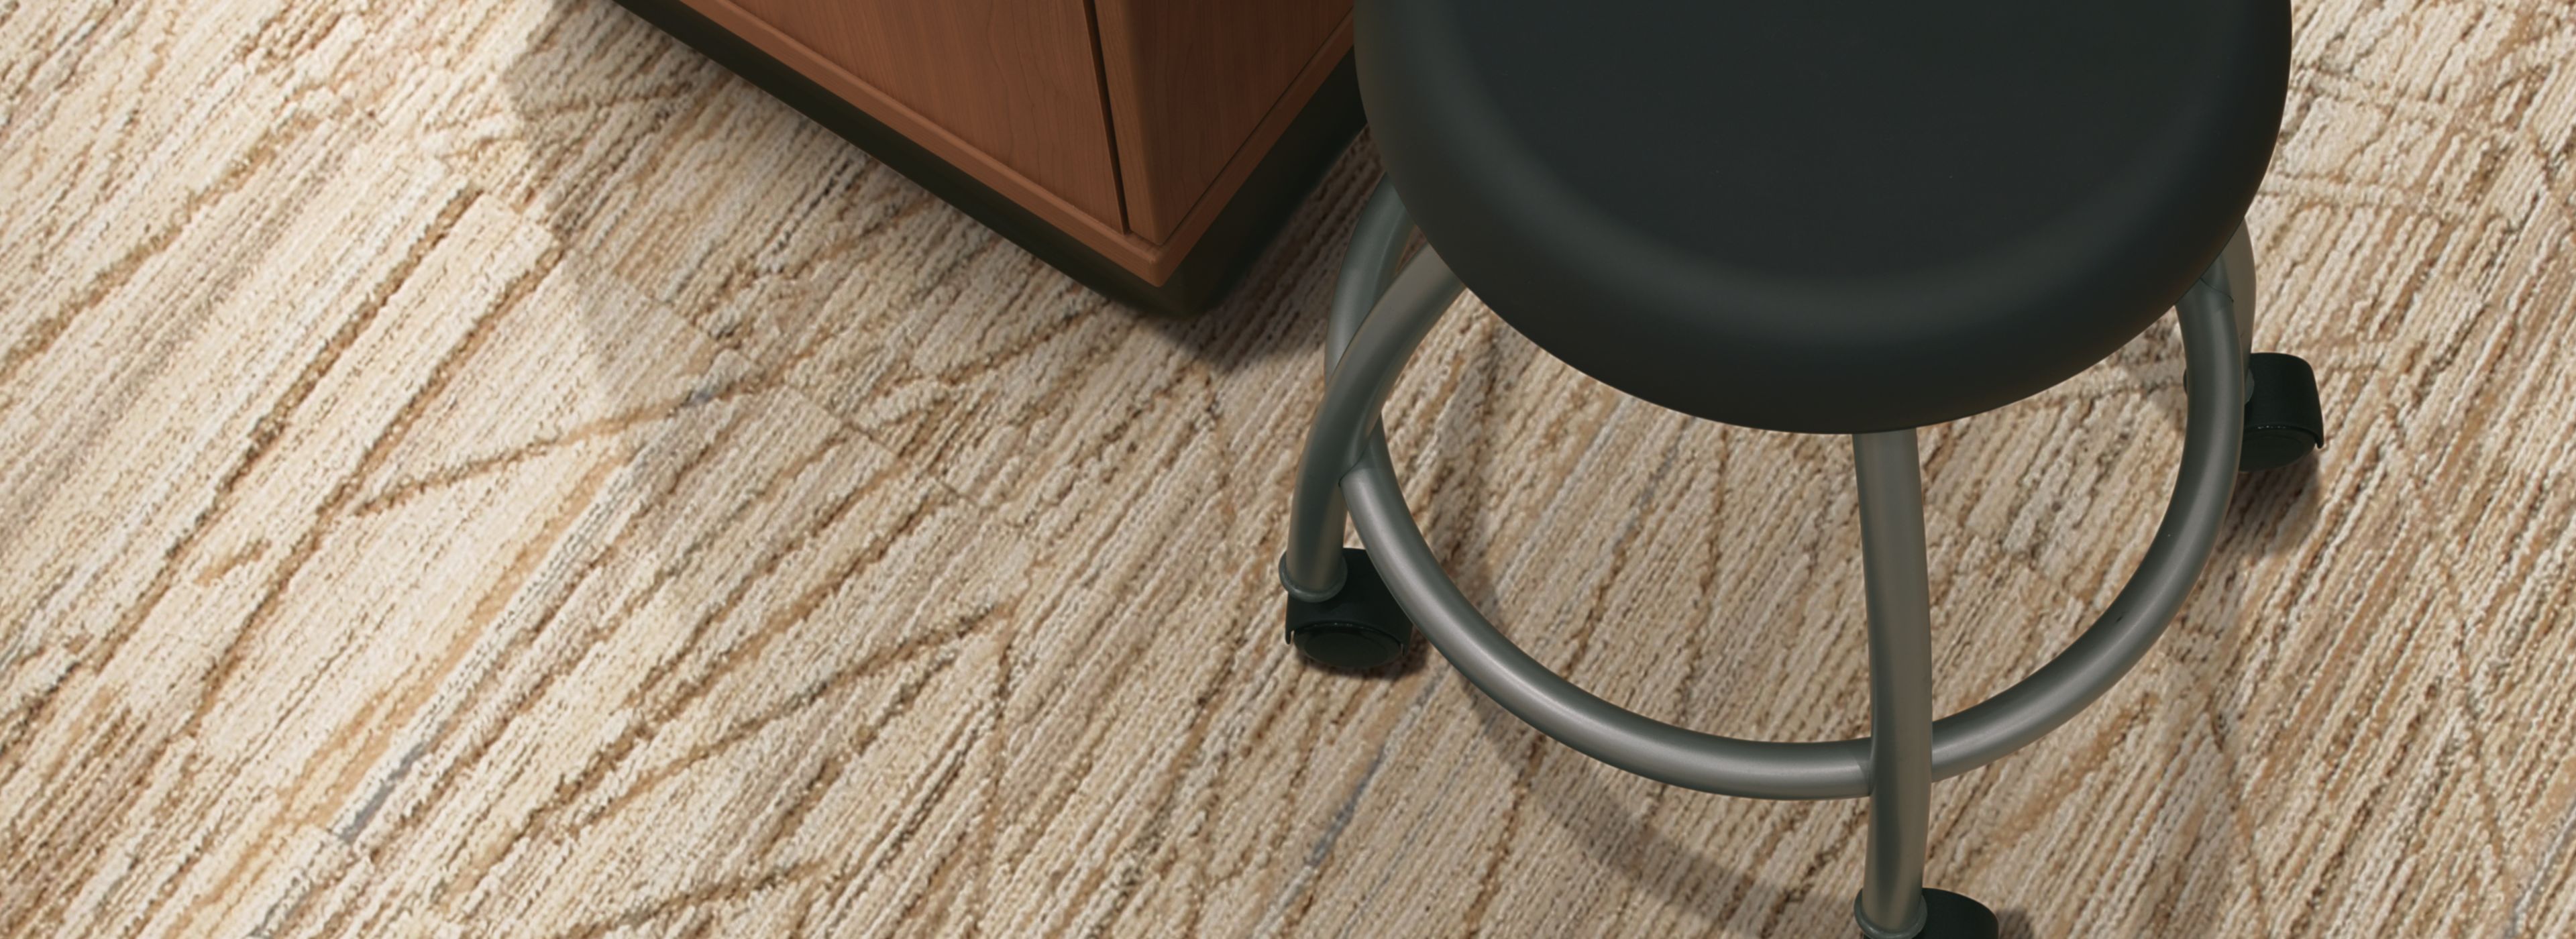 Interface Prairie Grass carpet tile in close up view with stool and cabinet numéro d’image 1